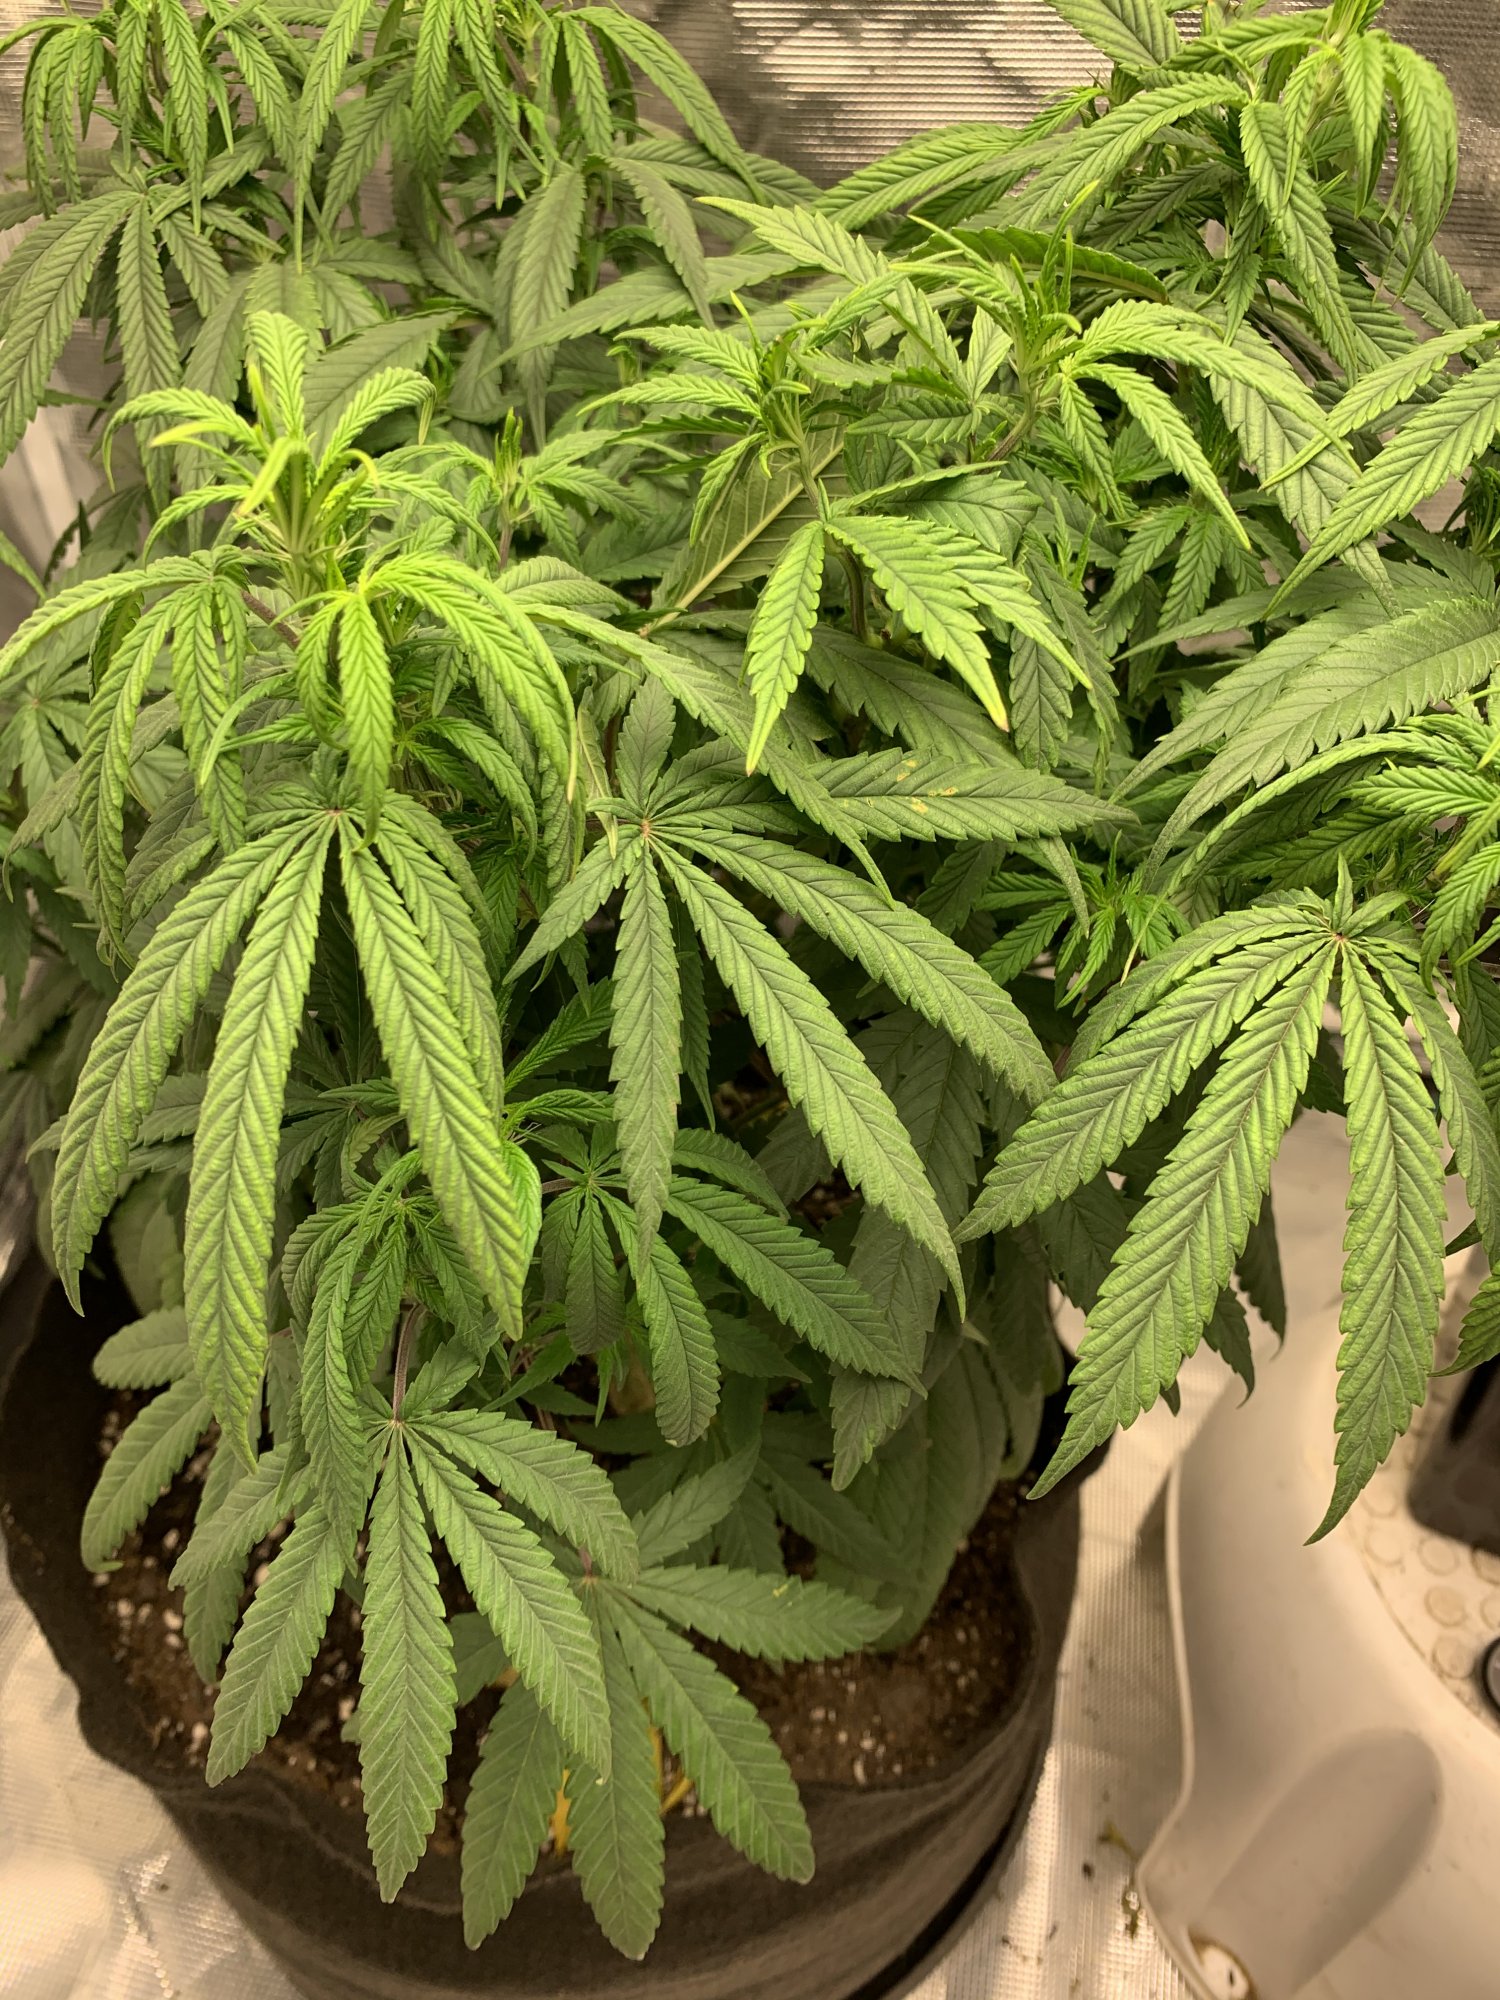 Star cookies continue to show deficiencies dont want to burn help 3